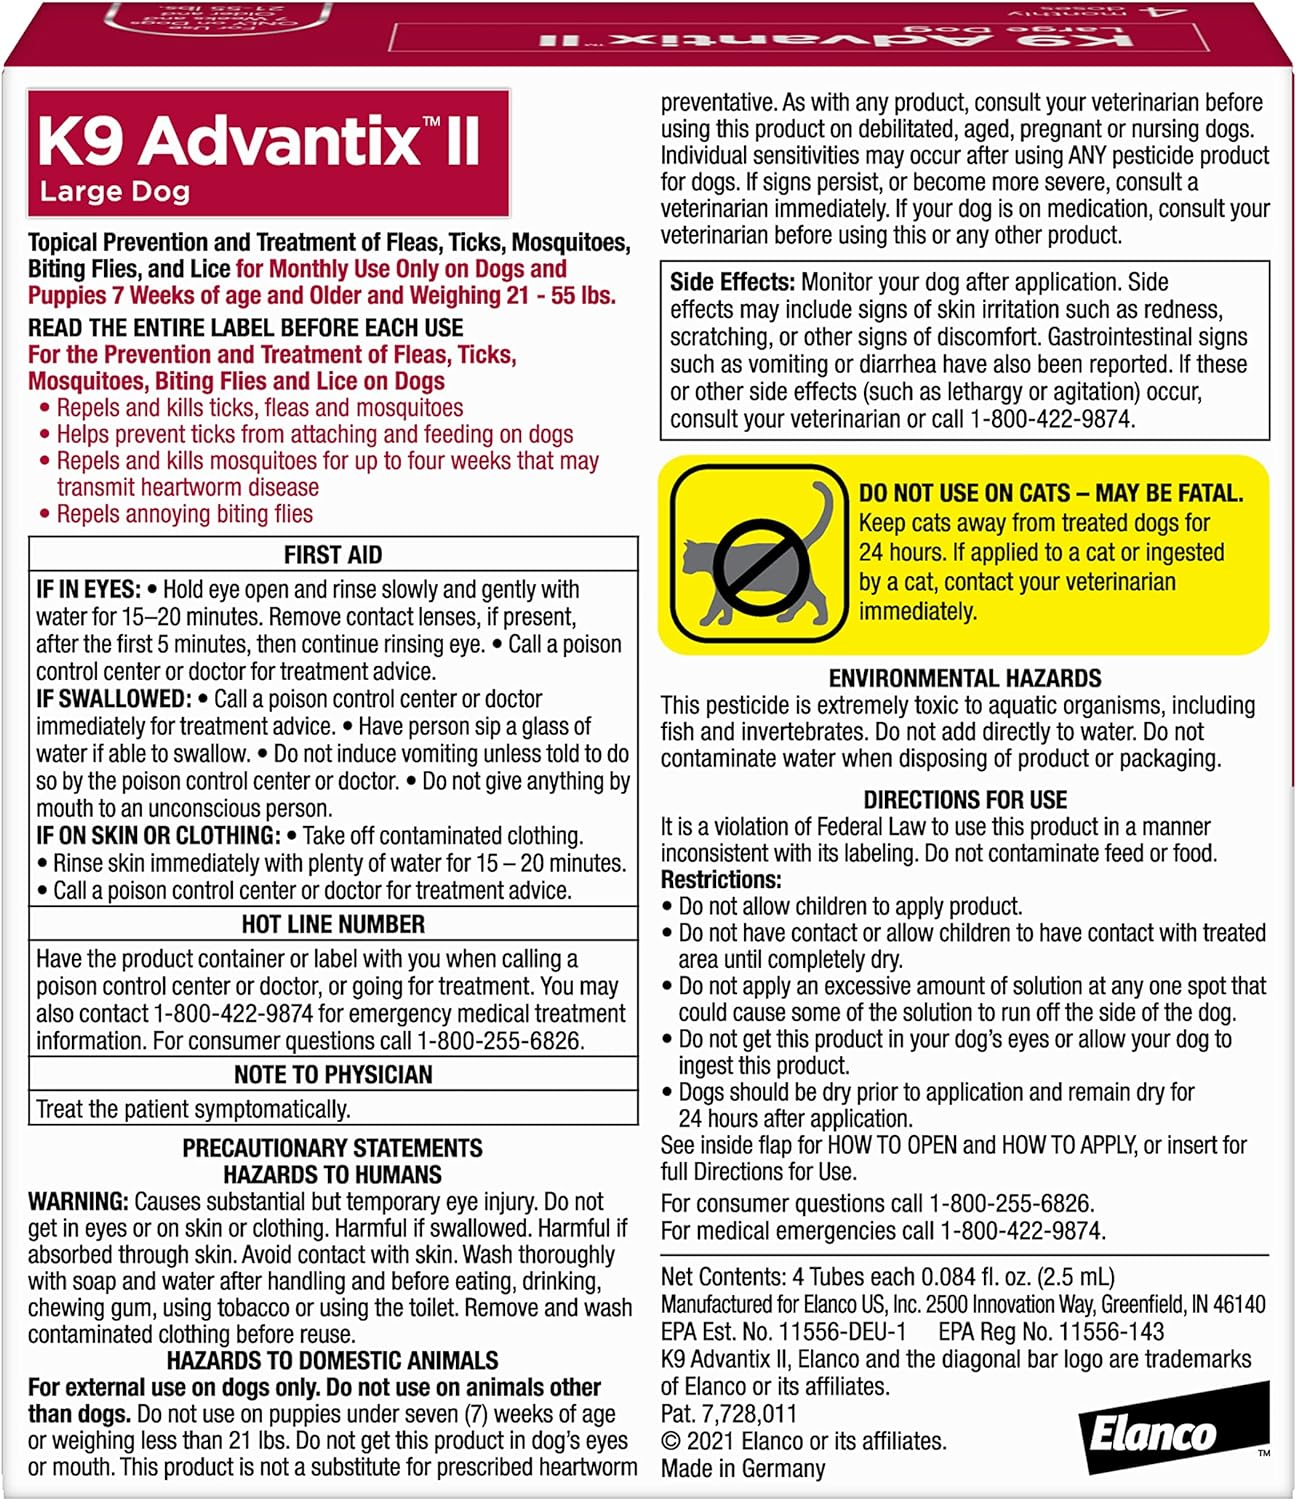 K9 Advantix II Large Dog Vet-Recommended Flea, Tick & Mosquito Treatment & Prevention | Dogs 21 - 55 lbs. | 4-Mo Supply